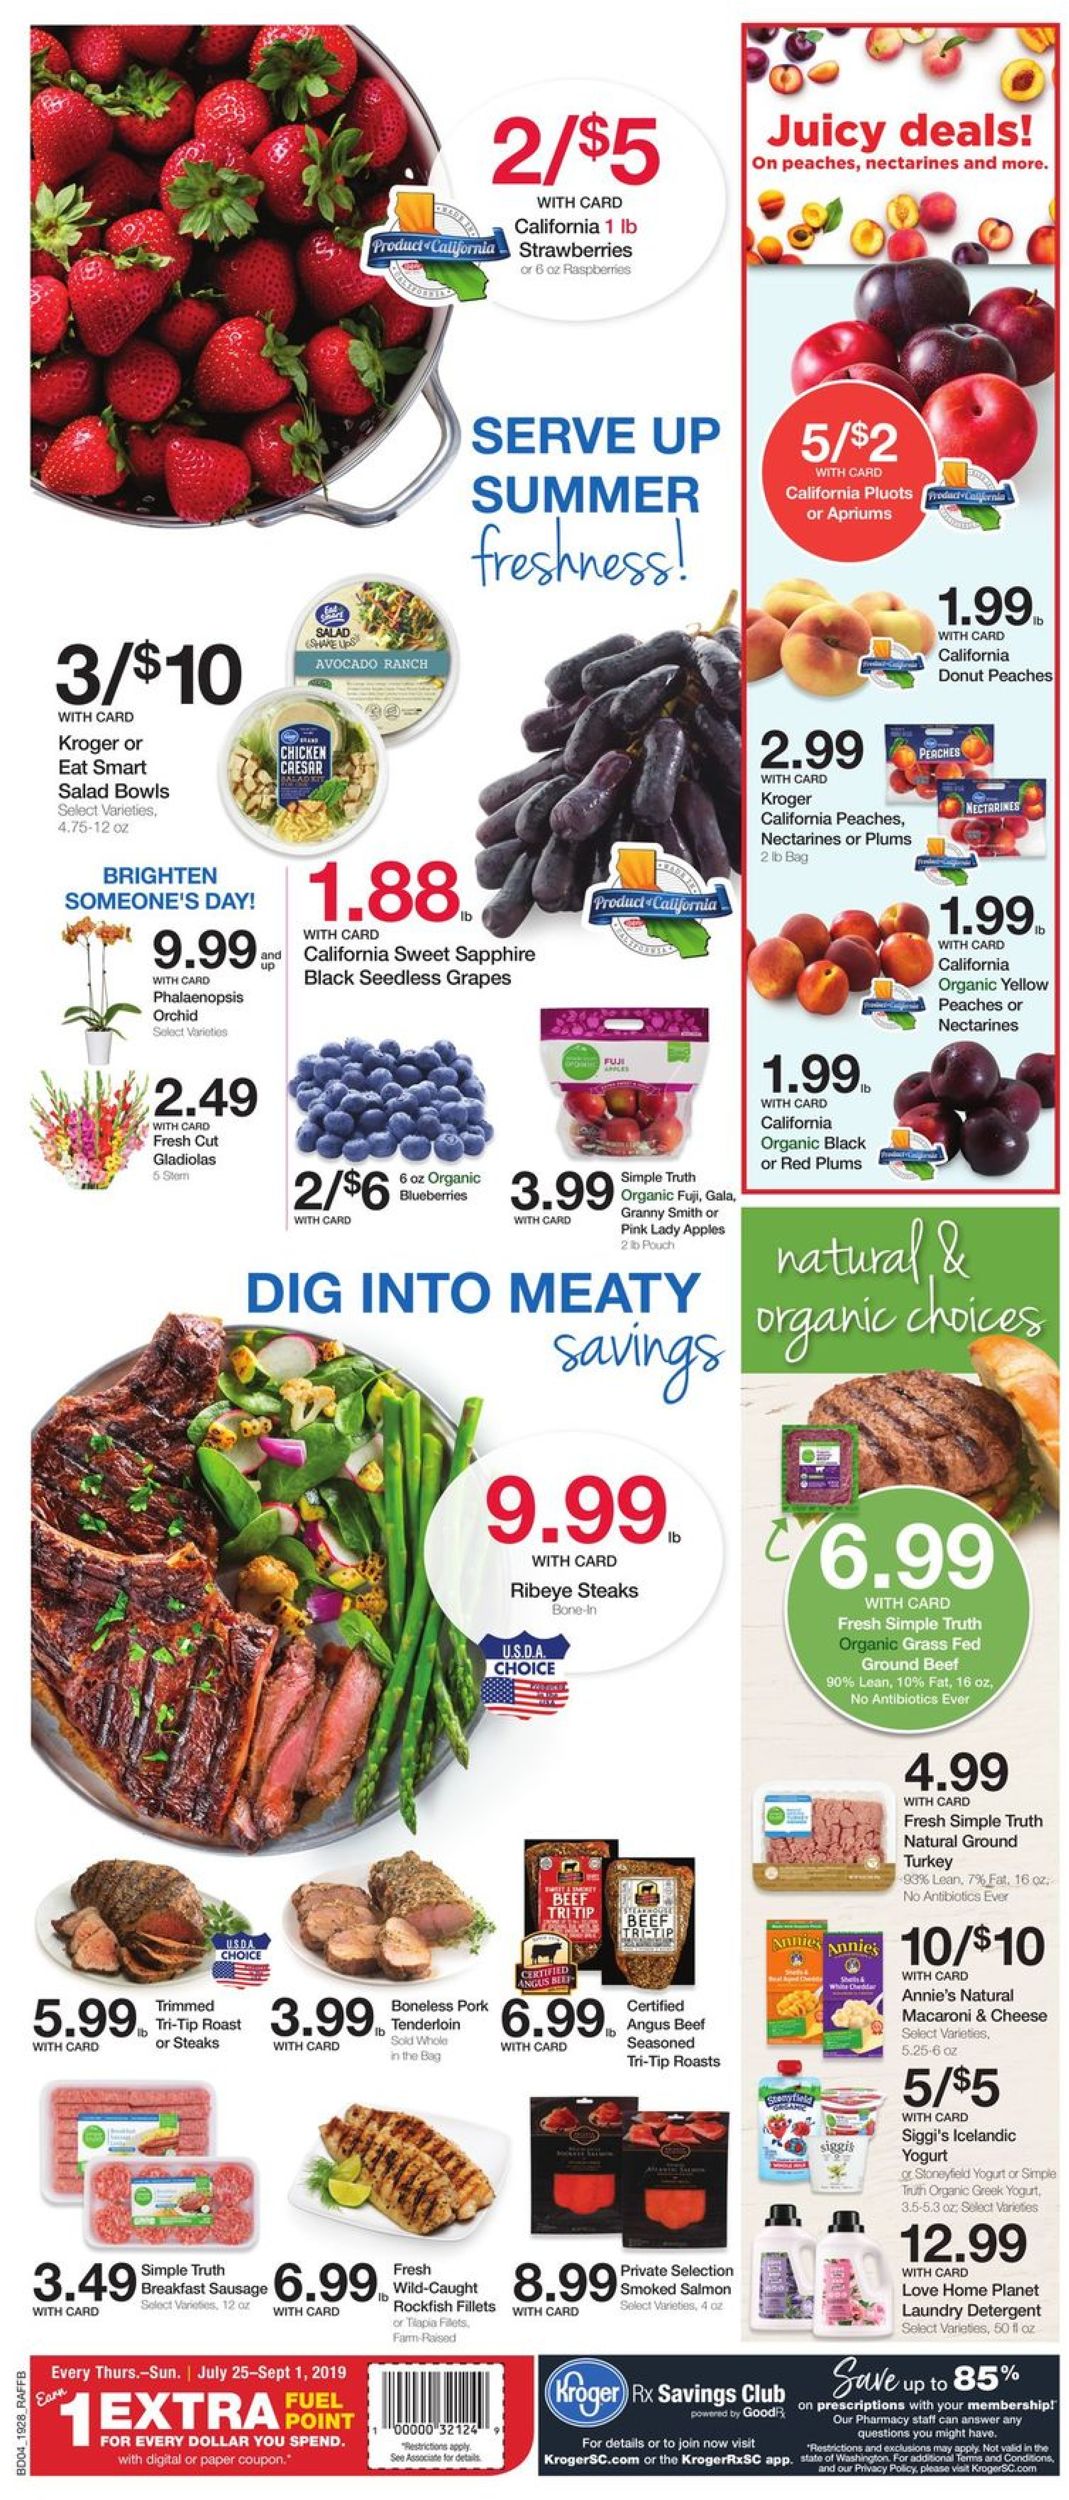 Catalogue Ralphs from 08/14/2019